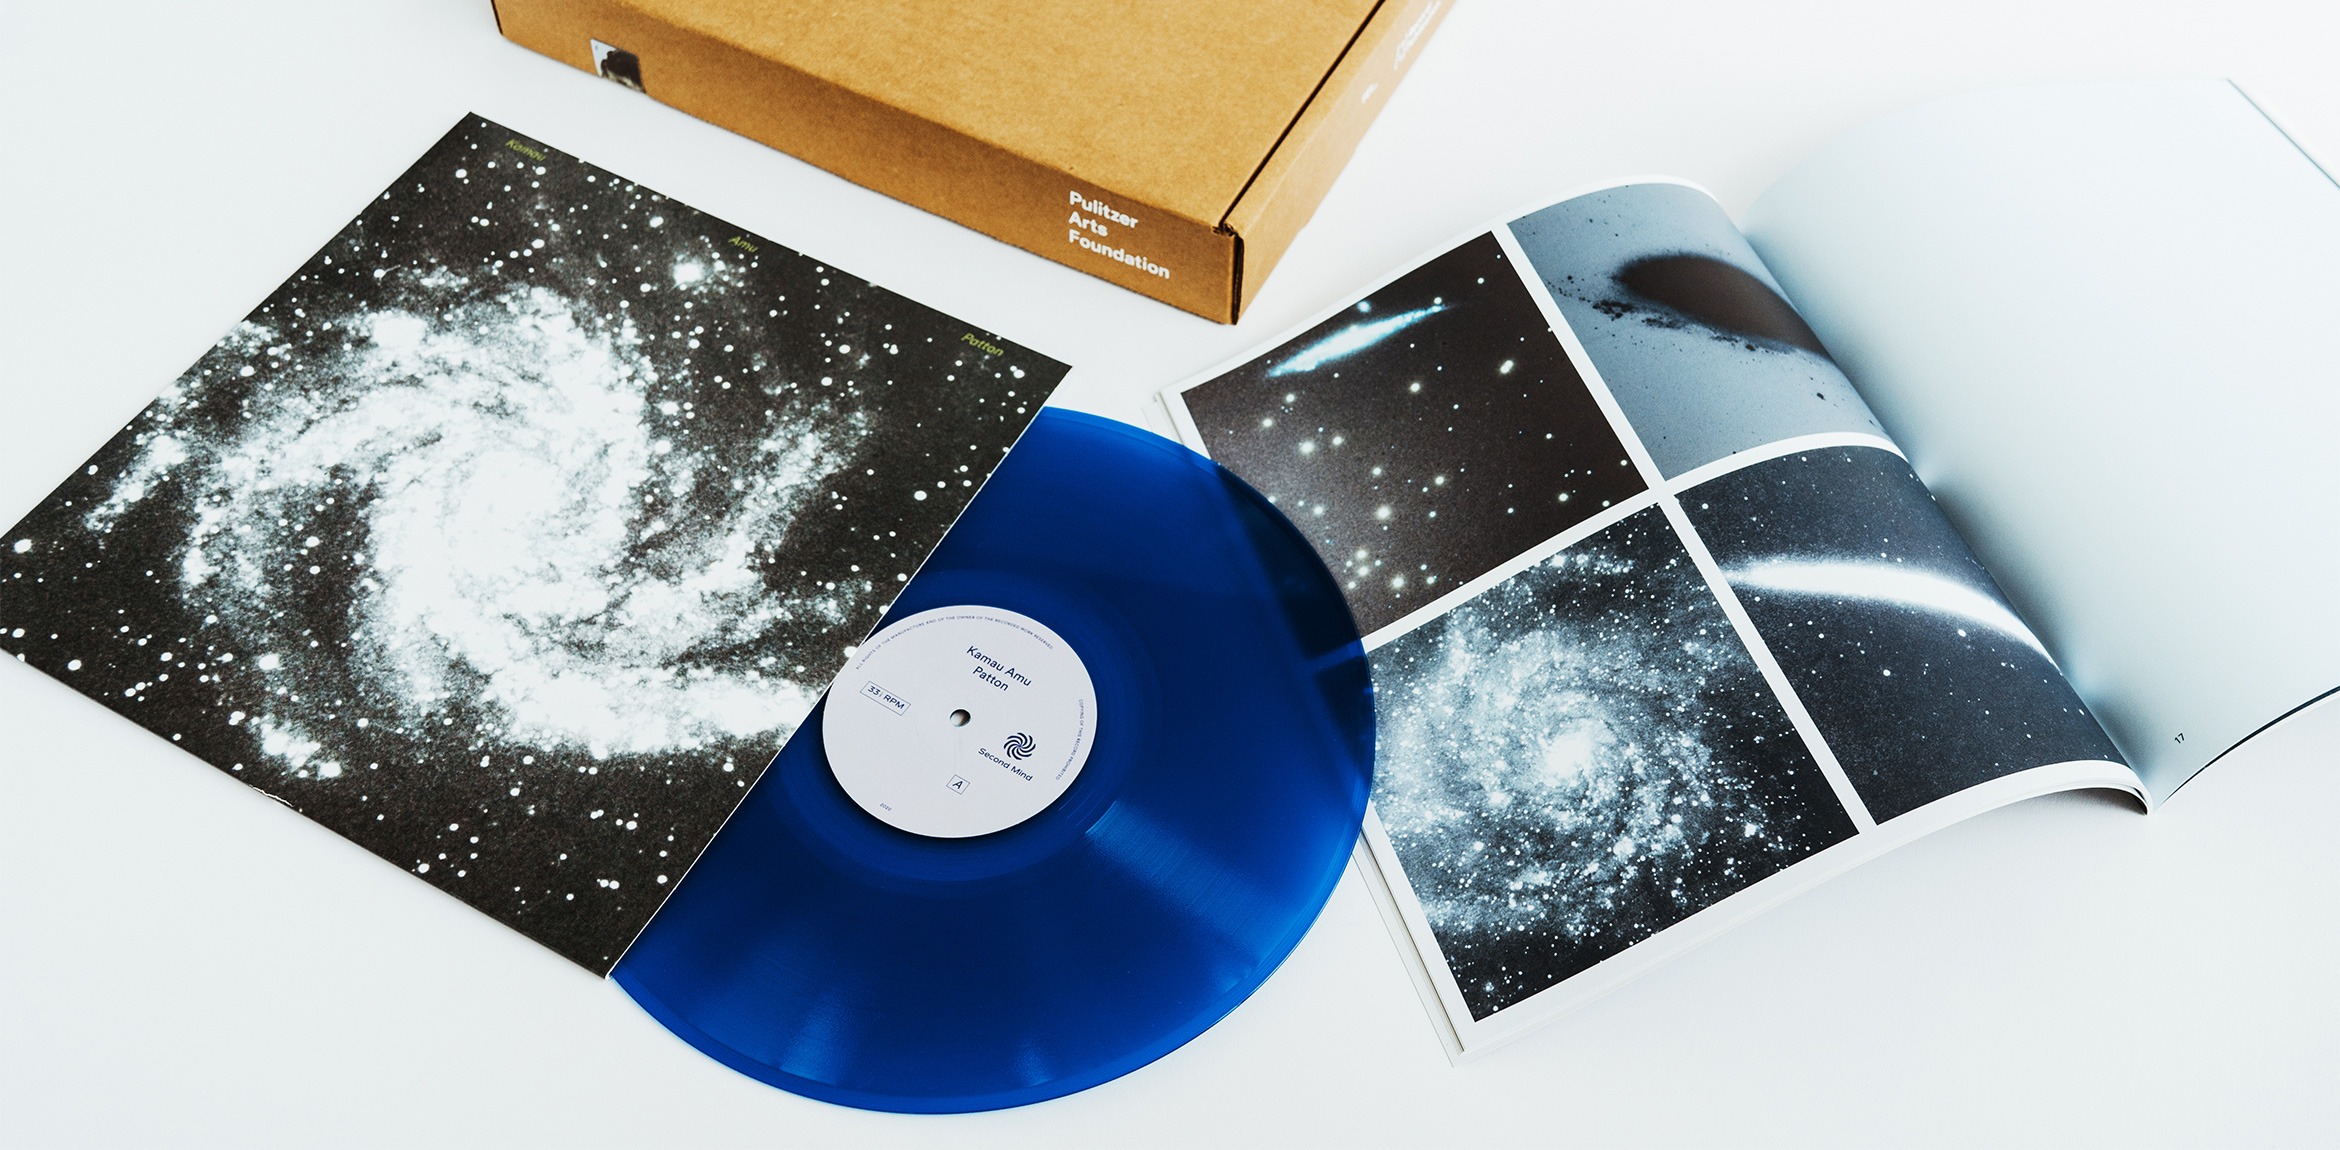 A blue vinyl record, album sleeve, and open publication featuring space imagery